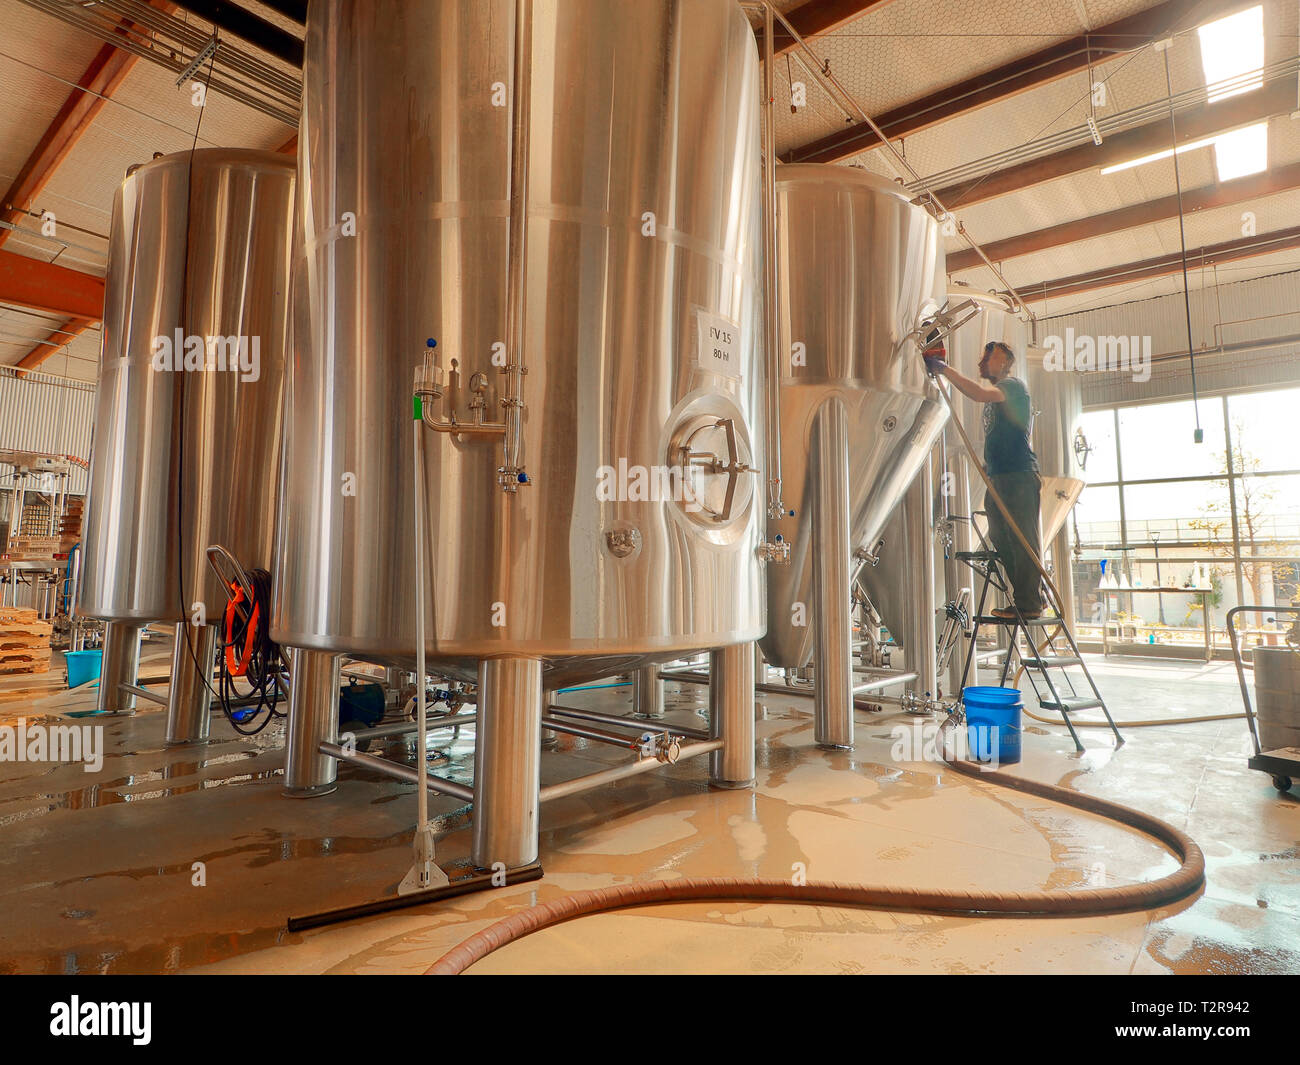 Stainless steel tanks at Legal craft brewery in Arlington, Texas. Located in former Auto dealership. Legal names given to brews, owner is a lawyer. Stock Photo